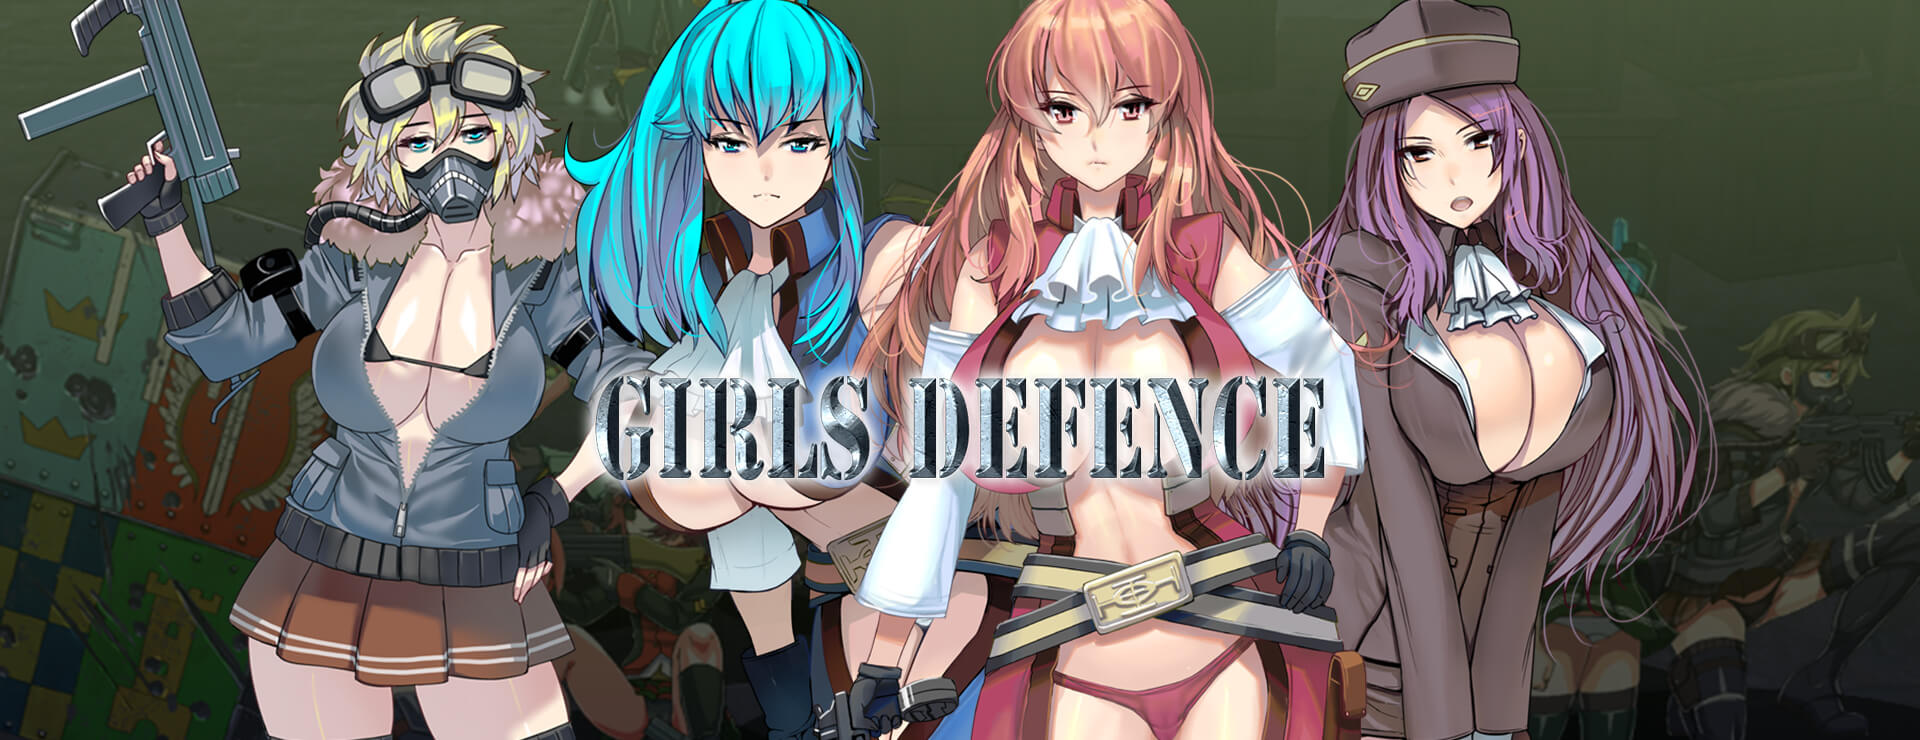 Girls Defence - Action Adventure Game